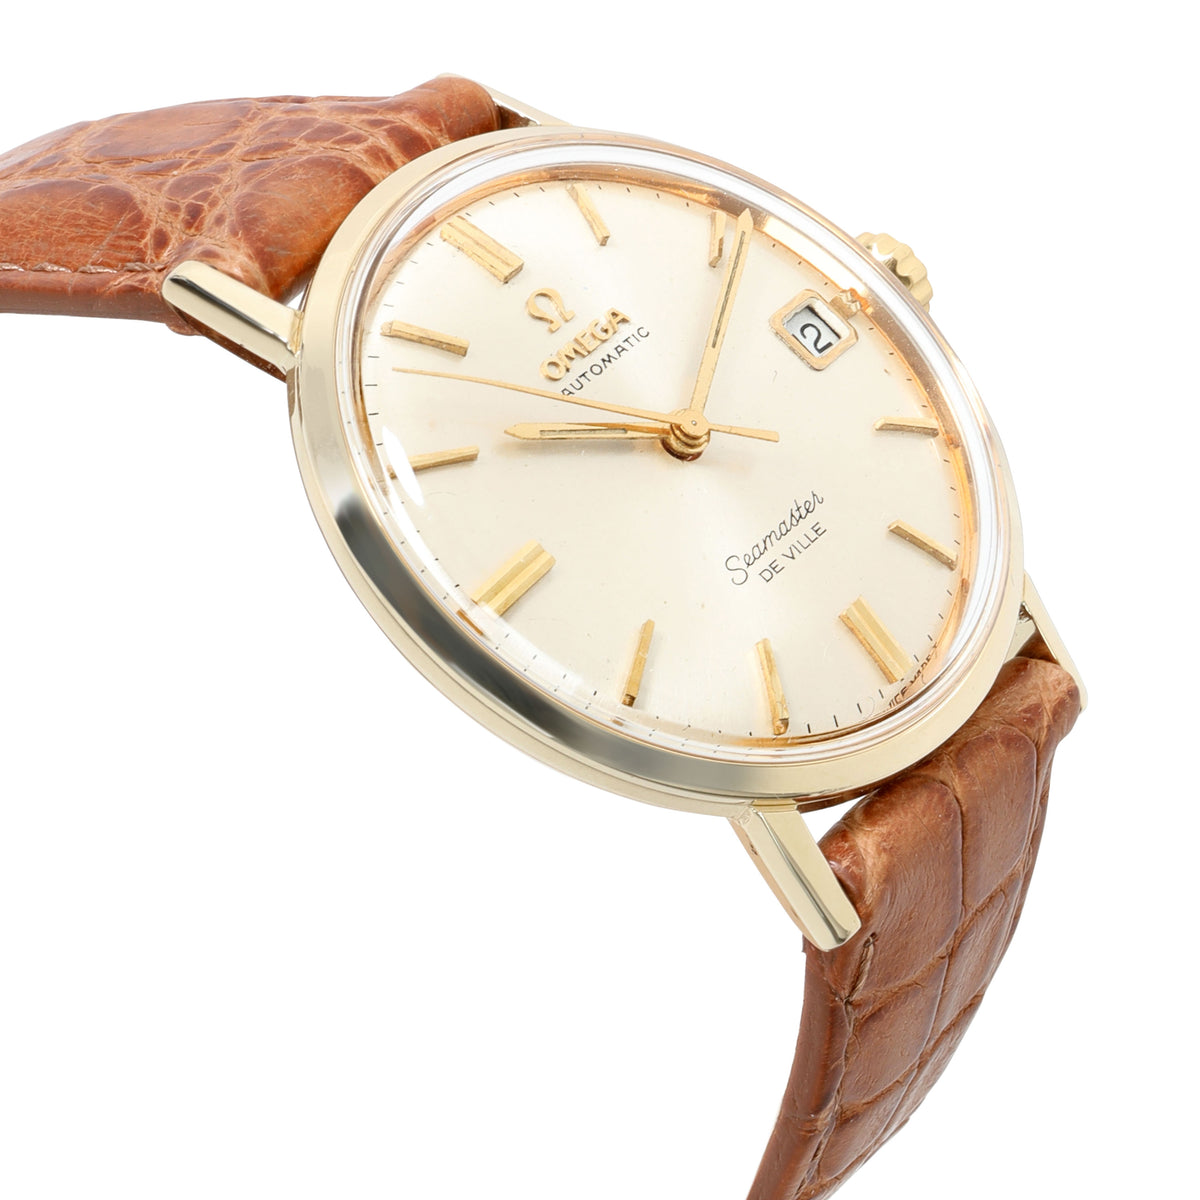 Omega Seamaster DeVille 166.002 Men's Watch in 14kt Yellow Gold